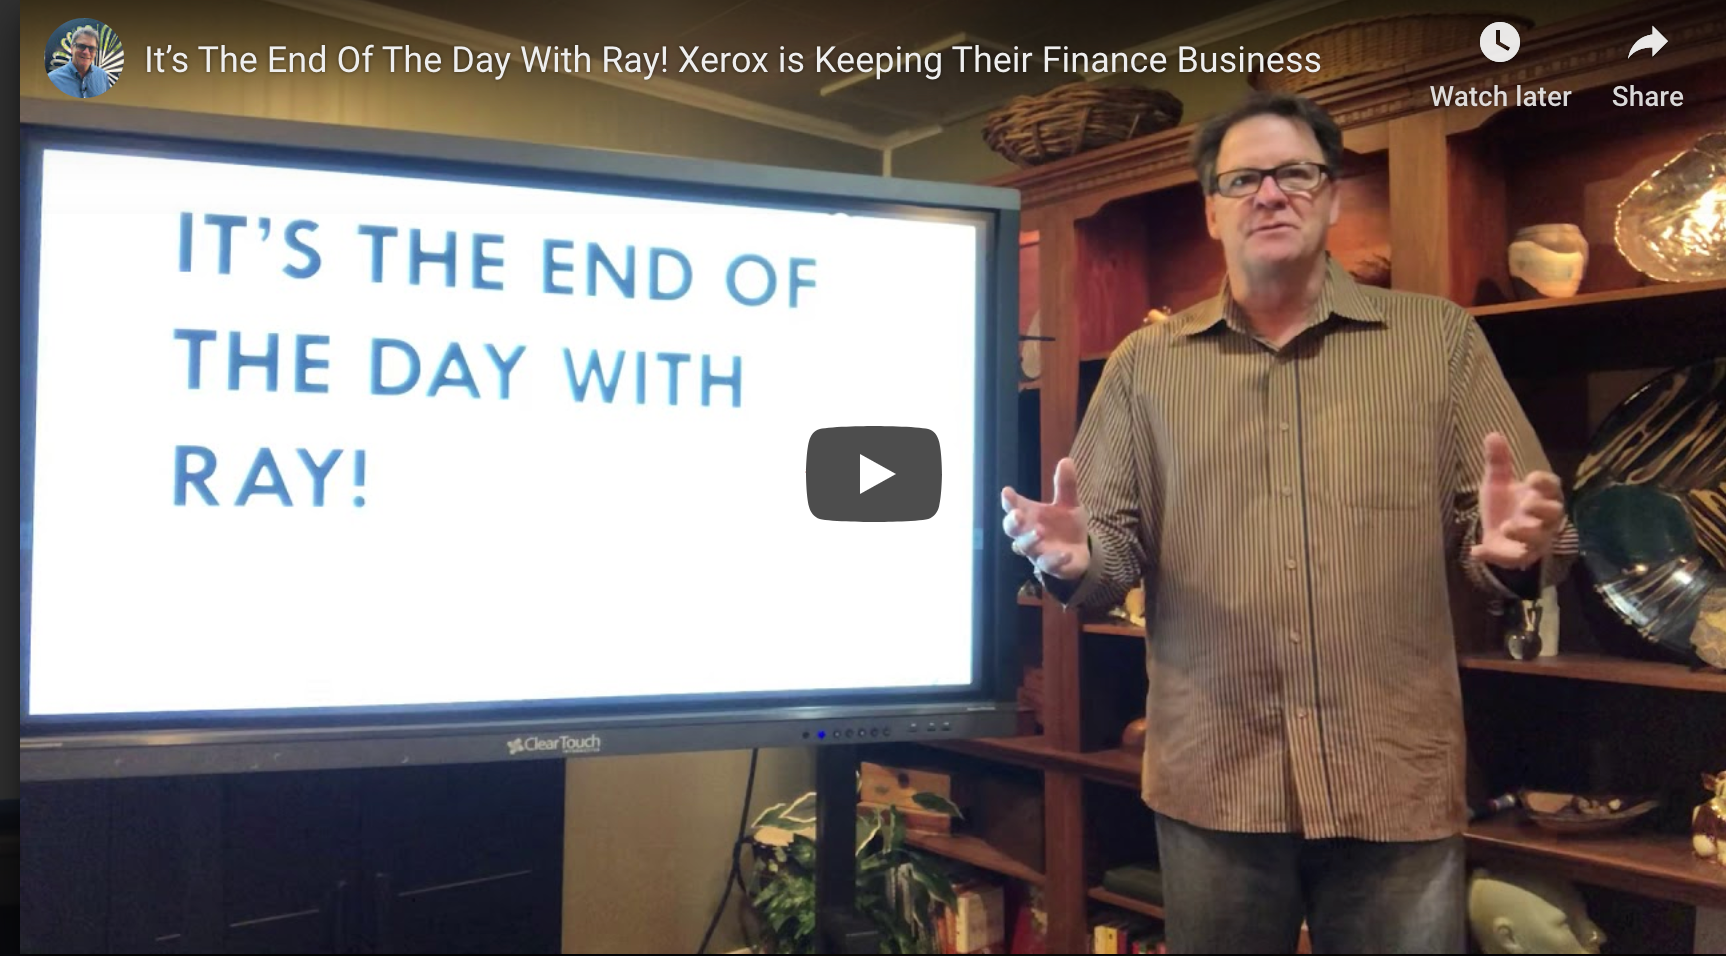 It’s The End Of The Day With Ray! Xerox is Keeping Their Finance Business